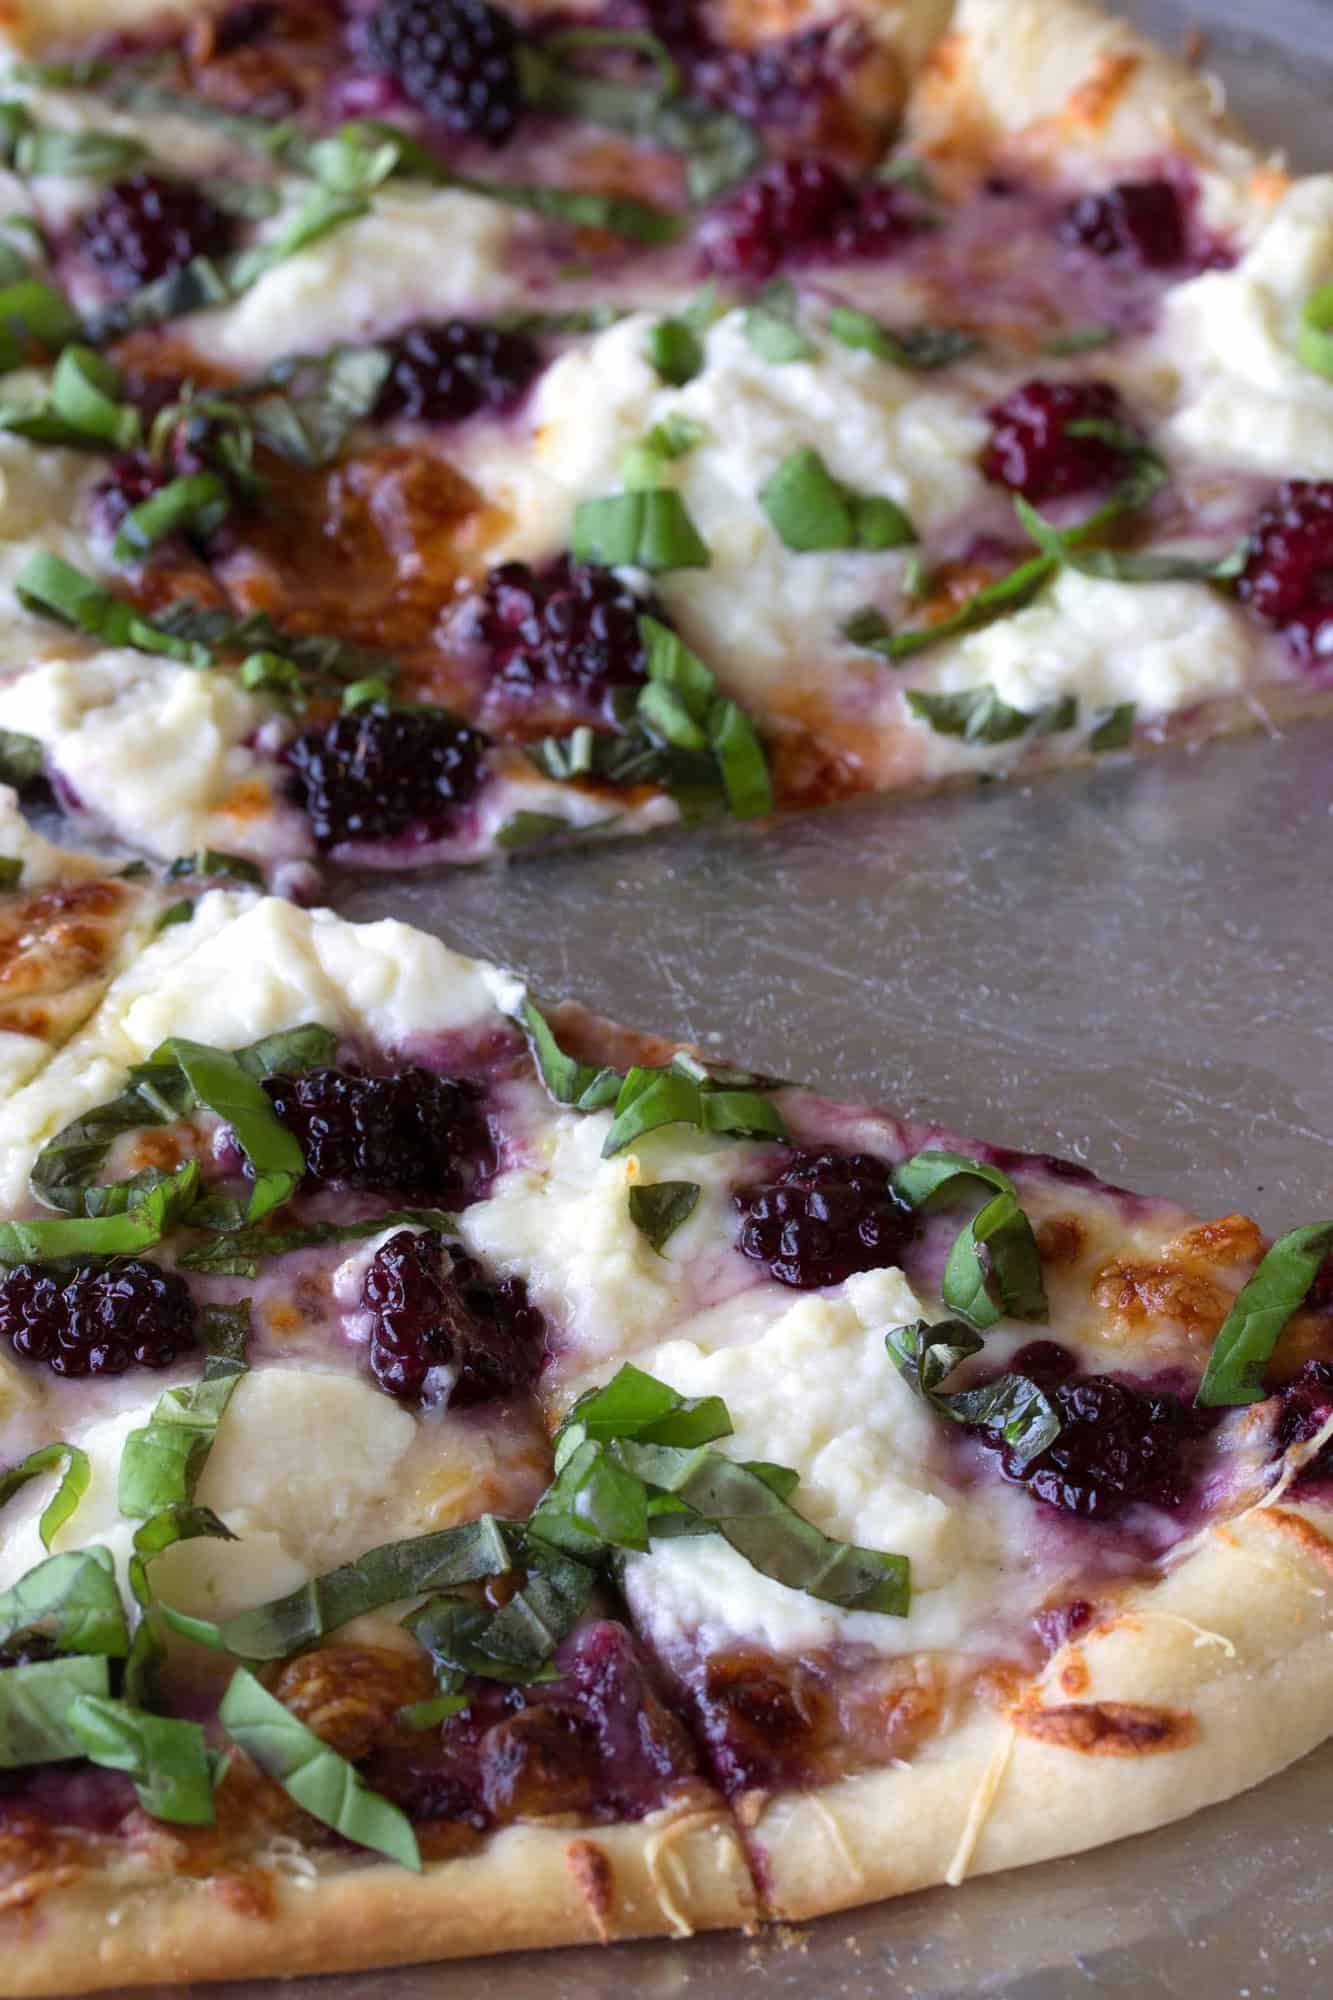 Dress up your pizza with something a little different in this Blackberry Basil Ricotta Pizza. It's elegant. It's simple. And it's totally delicious!